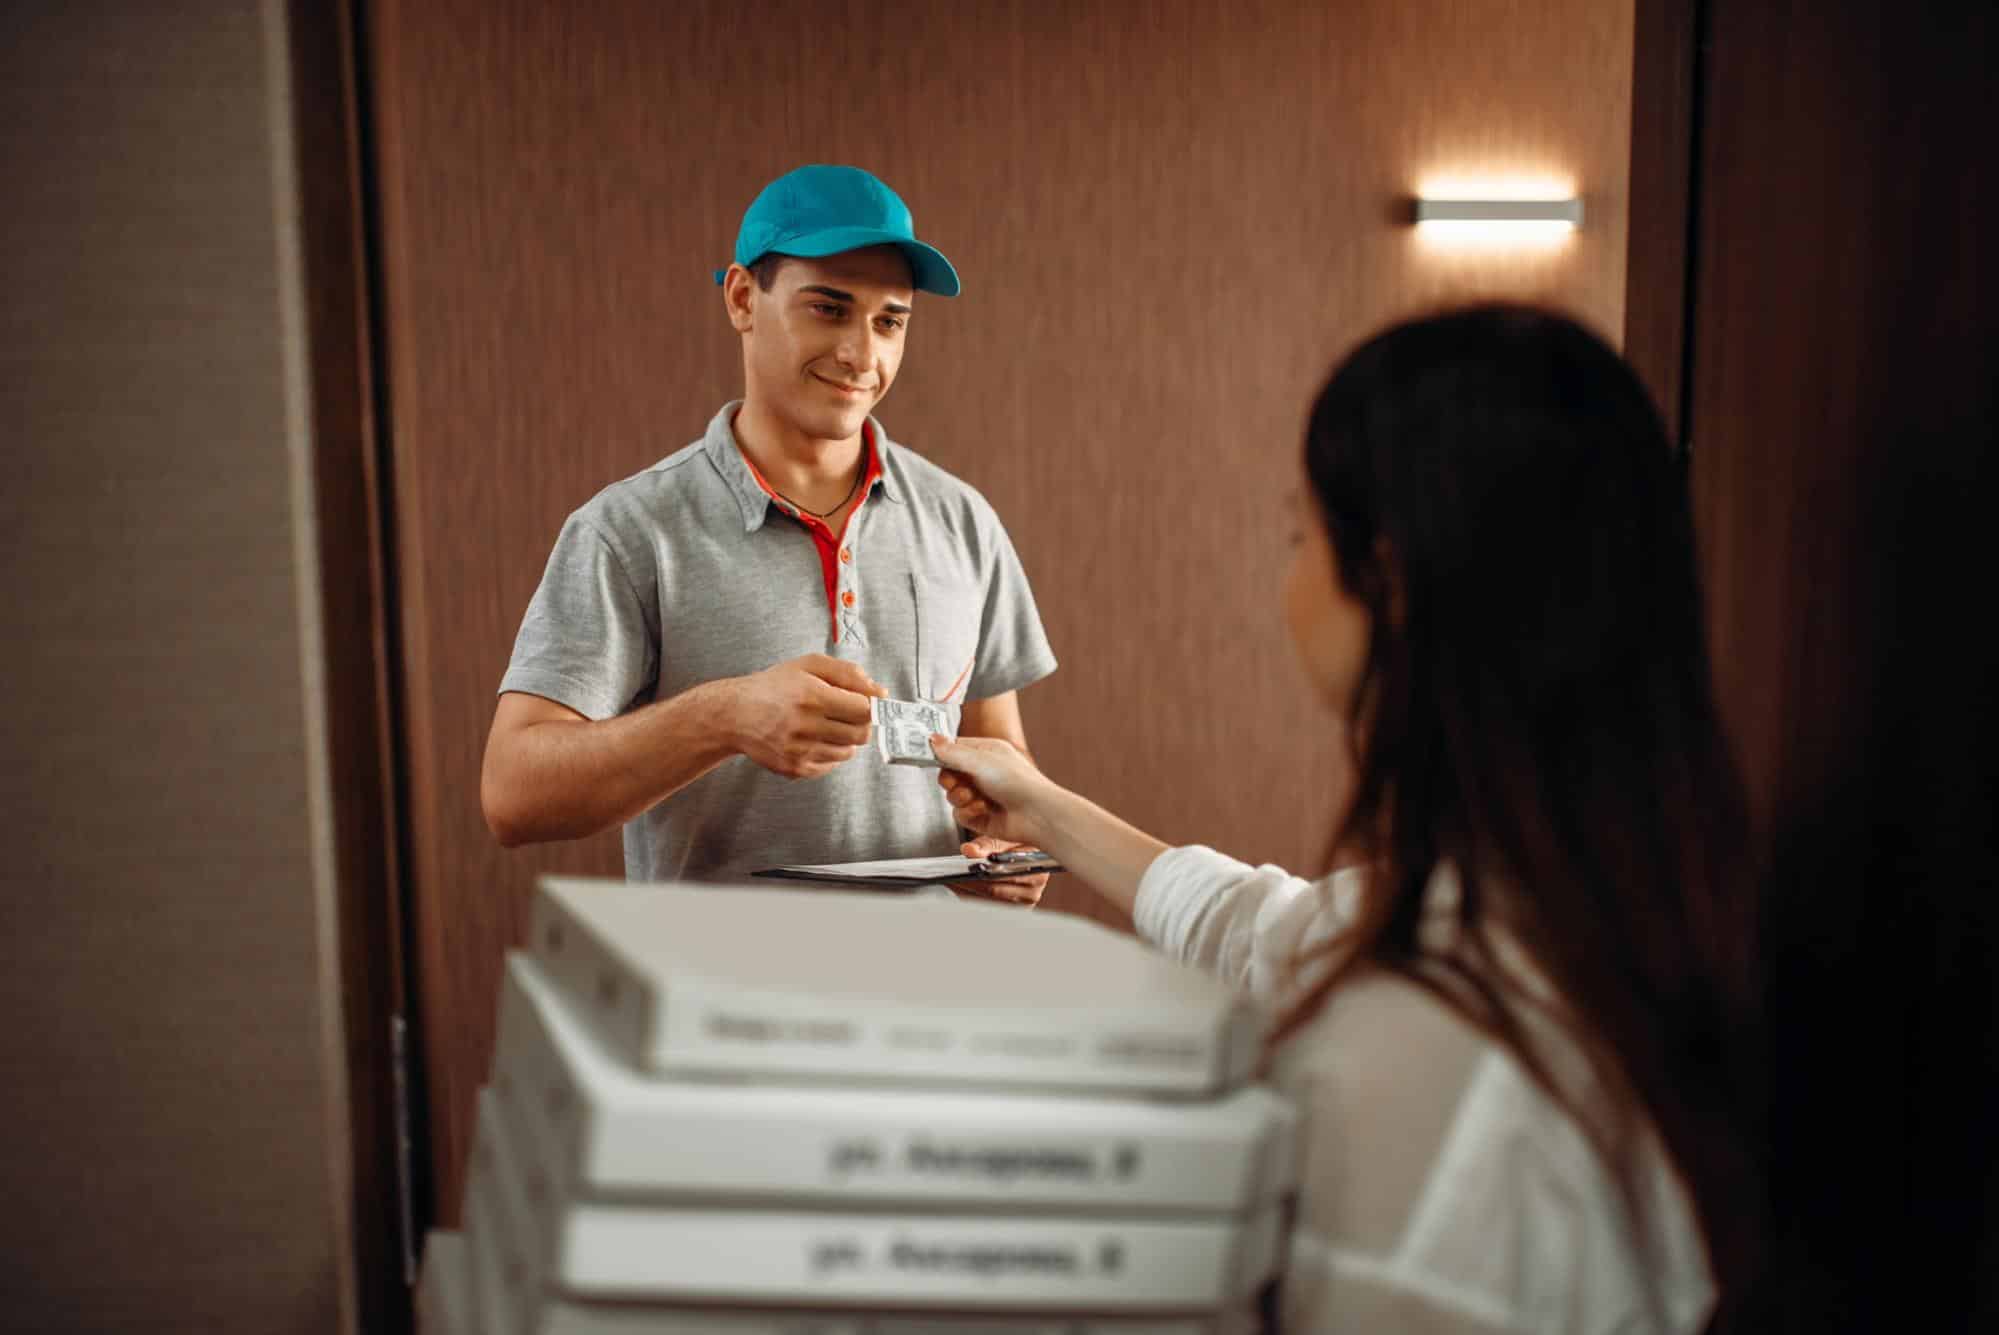 How much should you tip a delivery driver: Tipping a pizza delivery driver